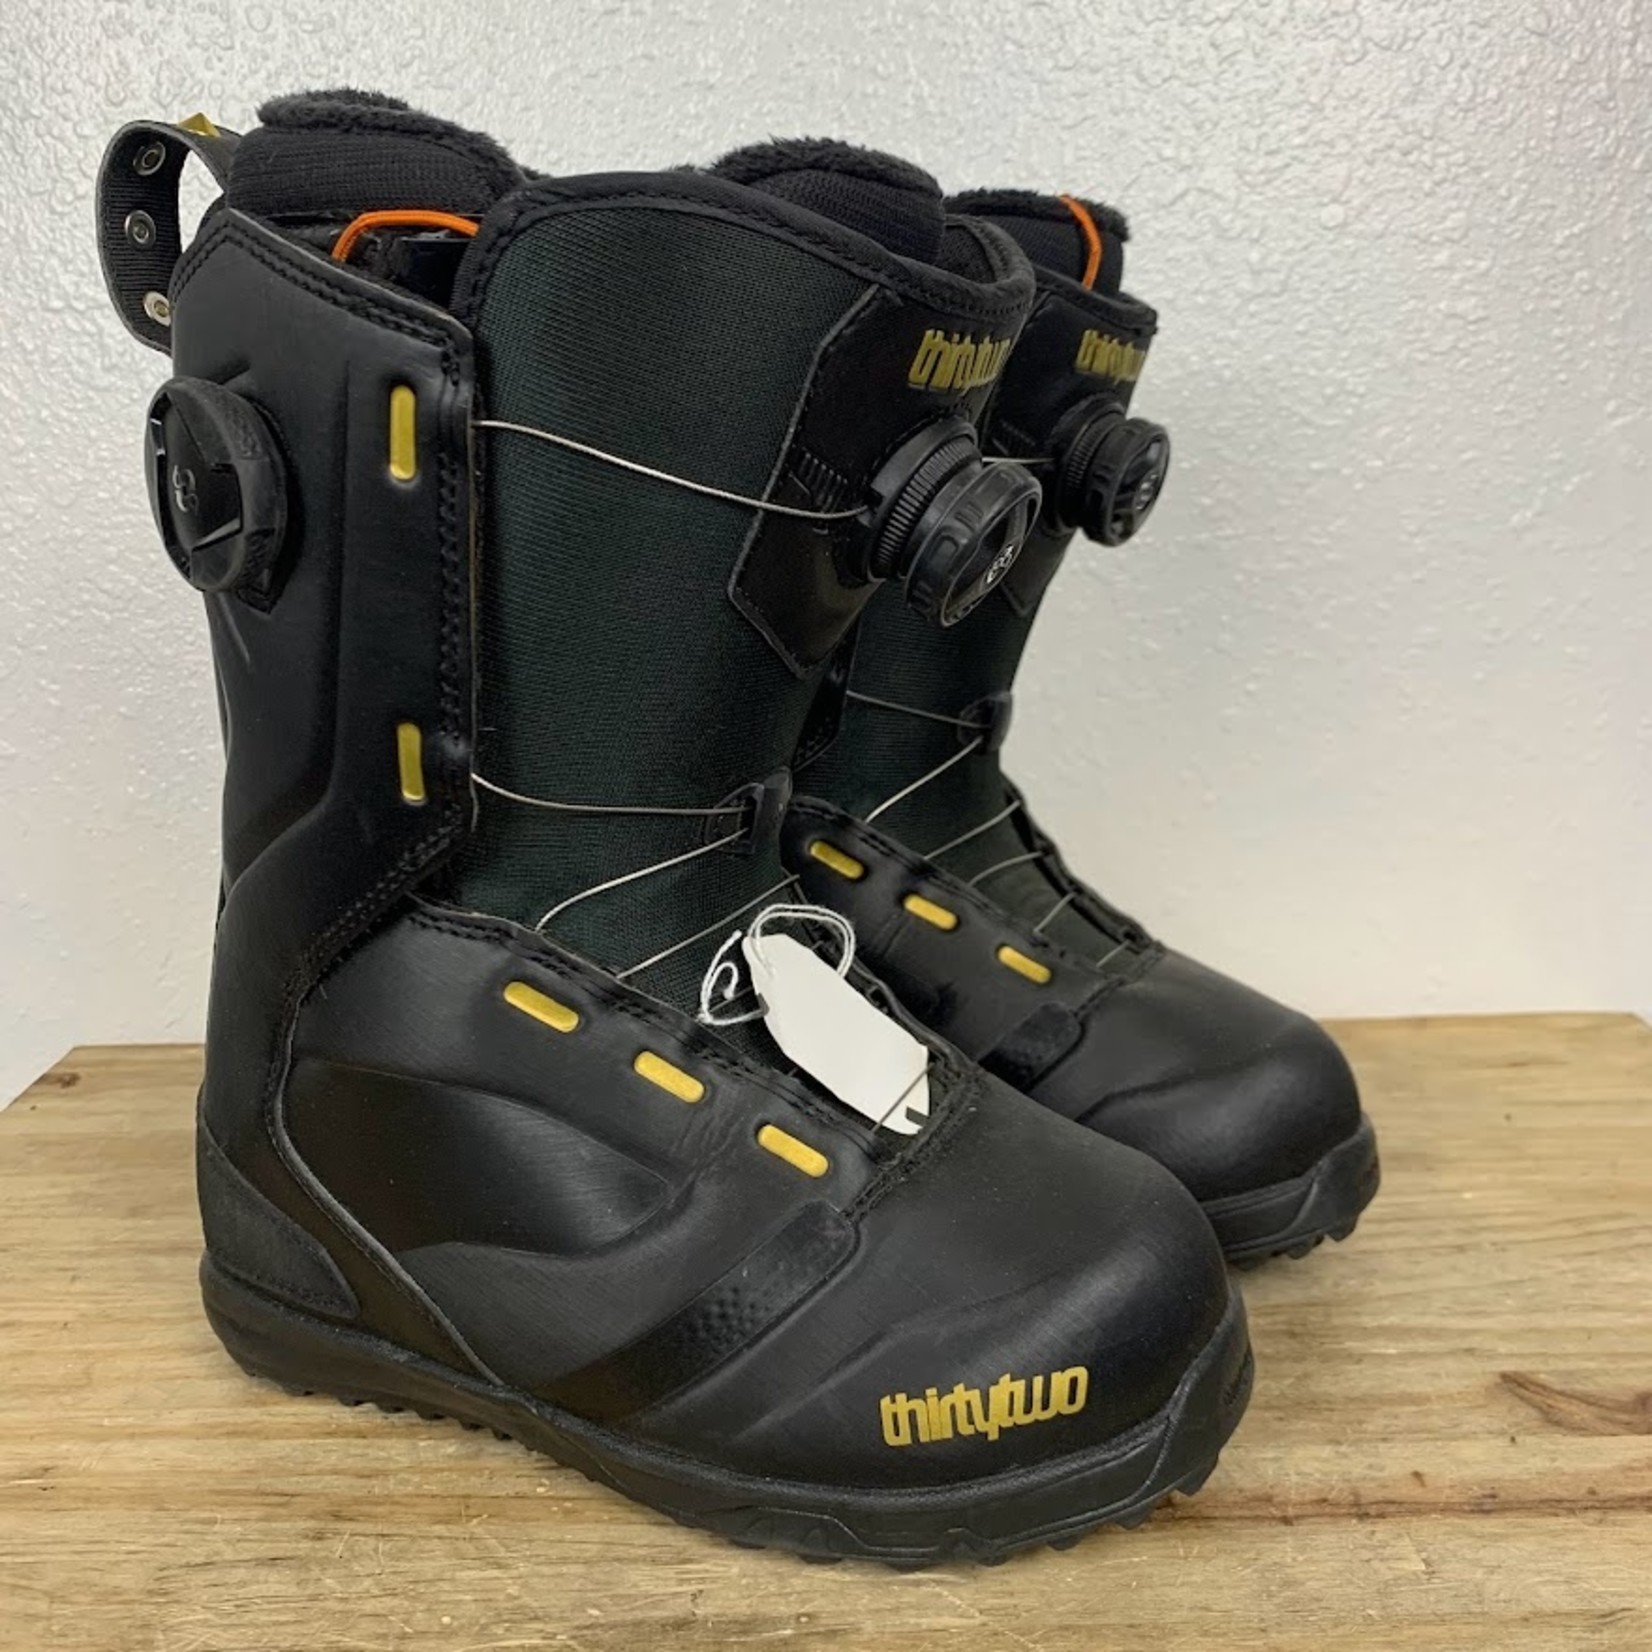 ThirtyTwo Snowboard Boots, Size 6 WMNS